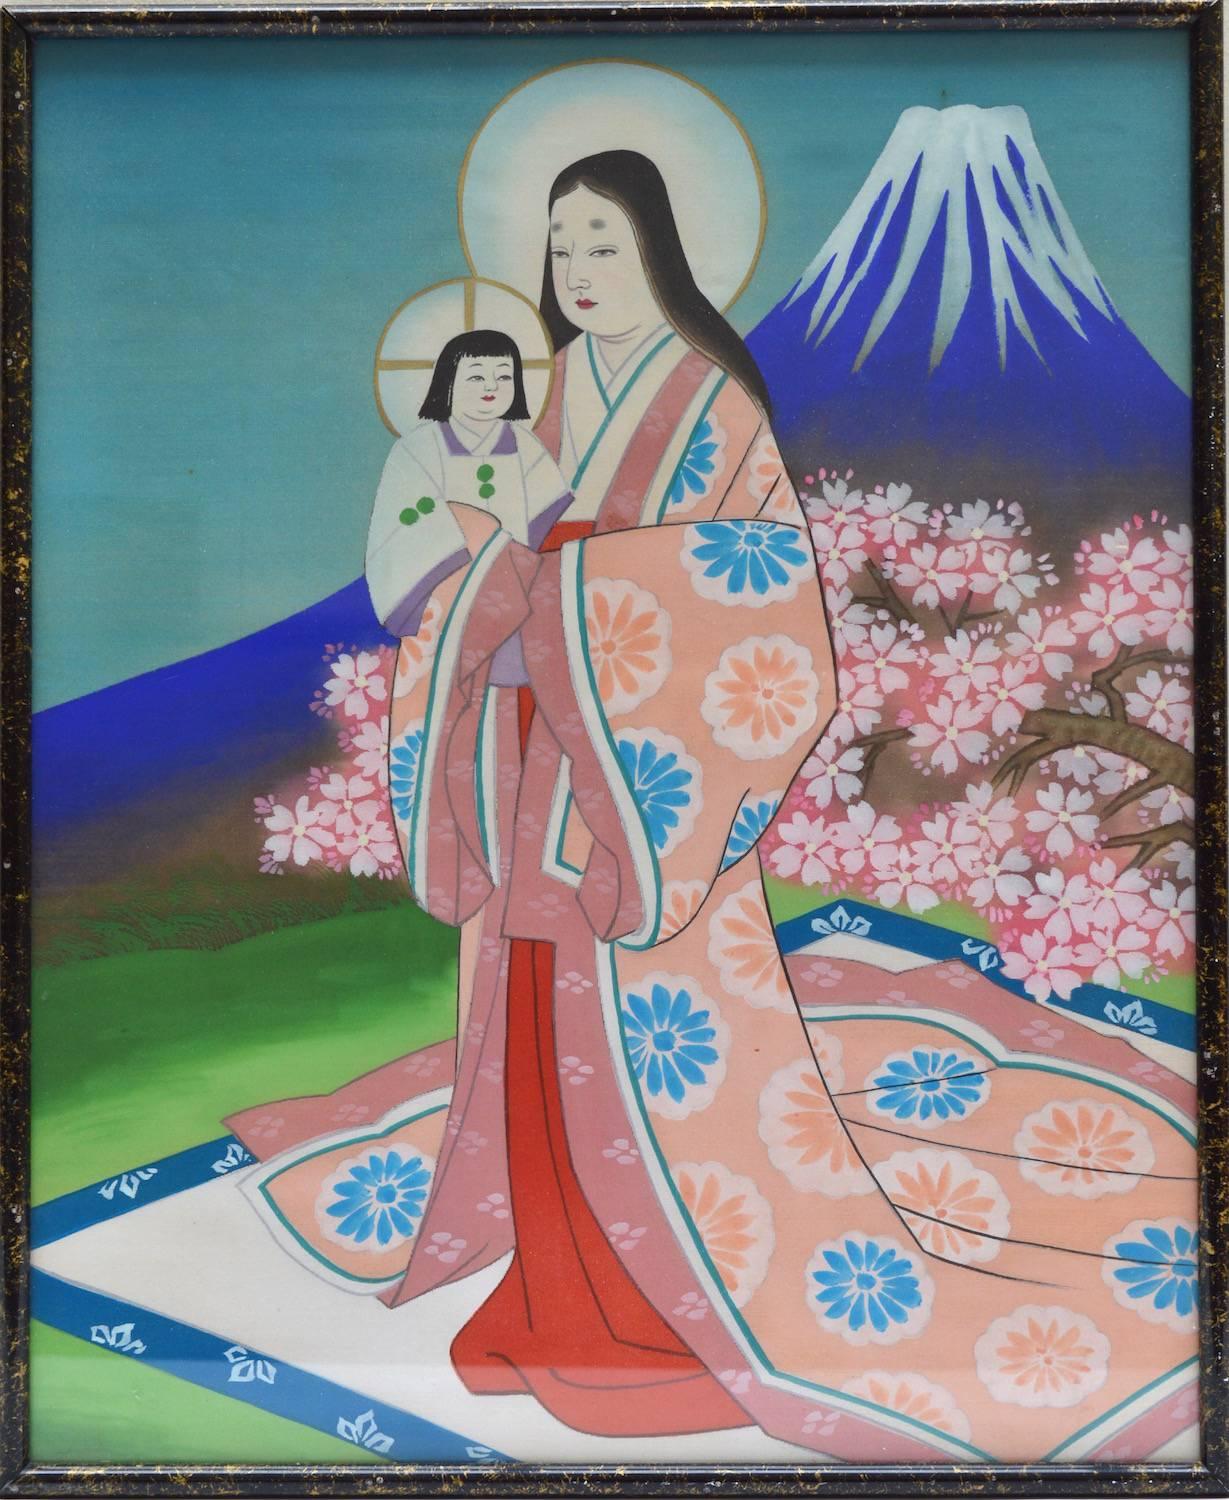 An extremely fine painting on silk of the Madonna and child painted by a Japanese Carmelite nun (Sister Teresa) in Tokyo late 1960s.
The painting was purchased in Belgium and was a gift from the Carmelite Cloister during a Mission visit in the late